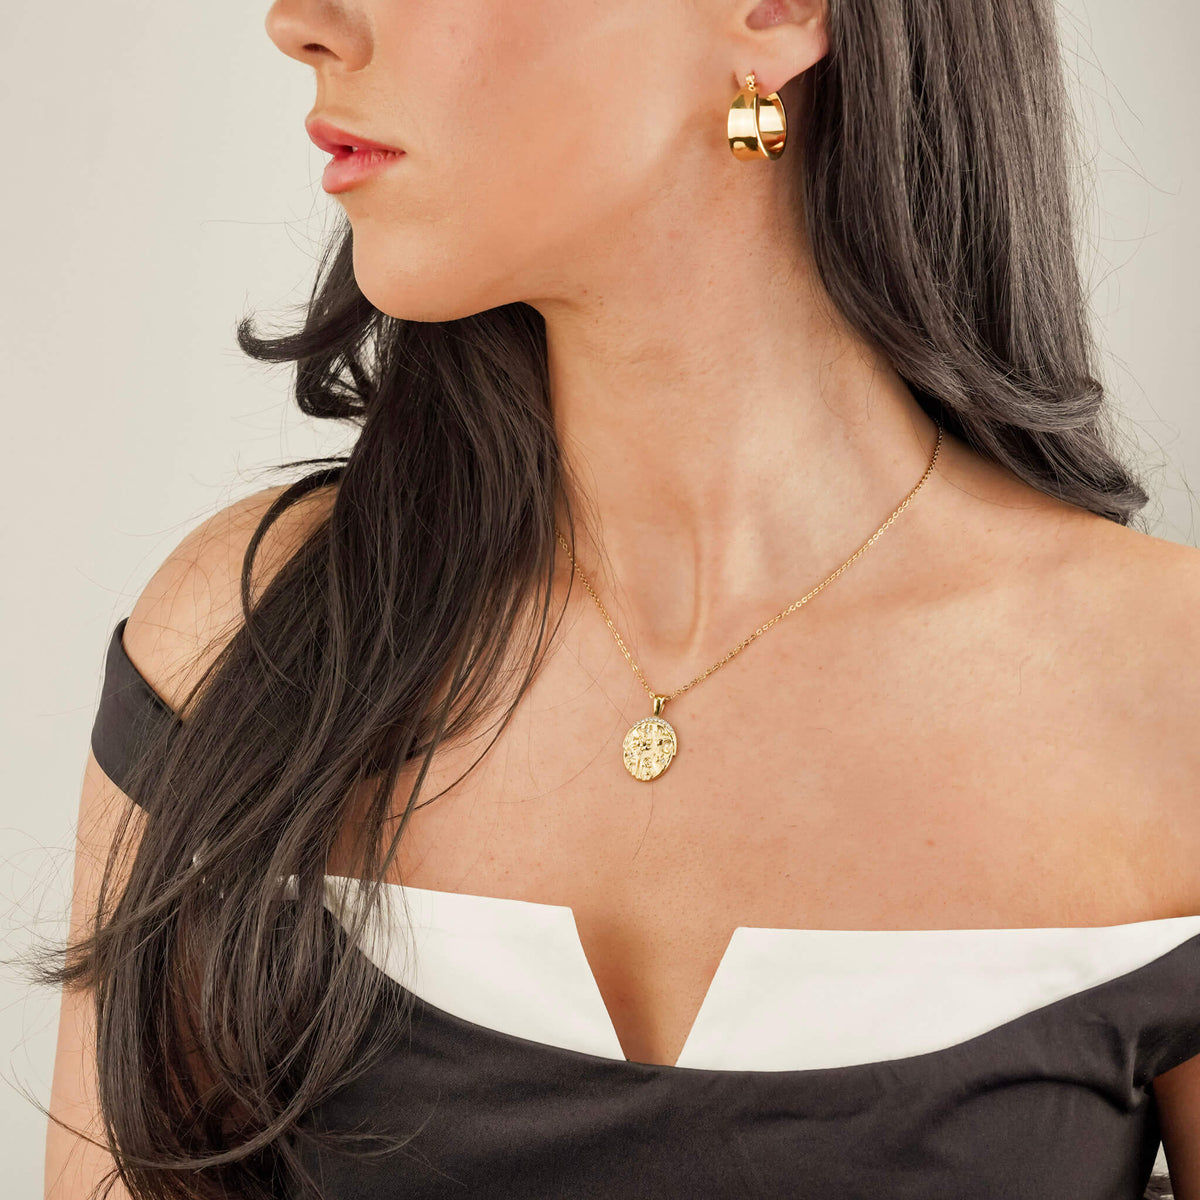 the model is wearing chunky statement earrings called the assertion hoops. They are lightweight and comfortable to wear, despite their commanding size. These earrings have a unique design that mirrors a cuff.  She is also wearing the days eye necklace 